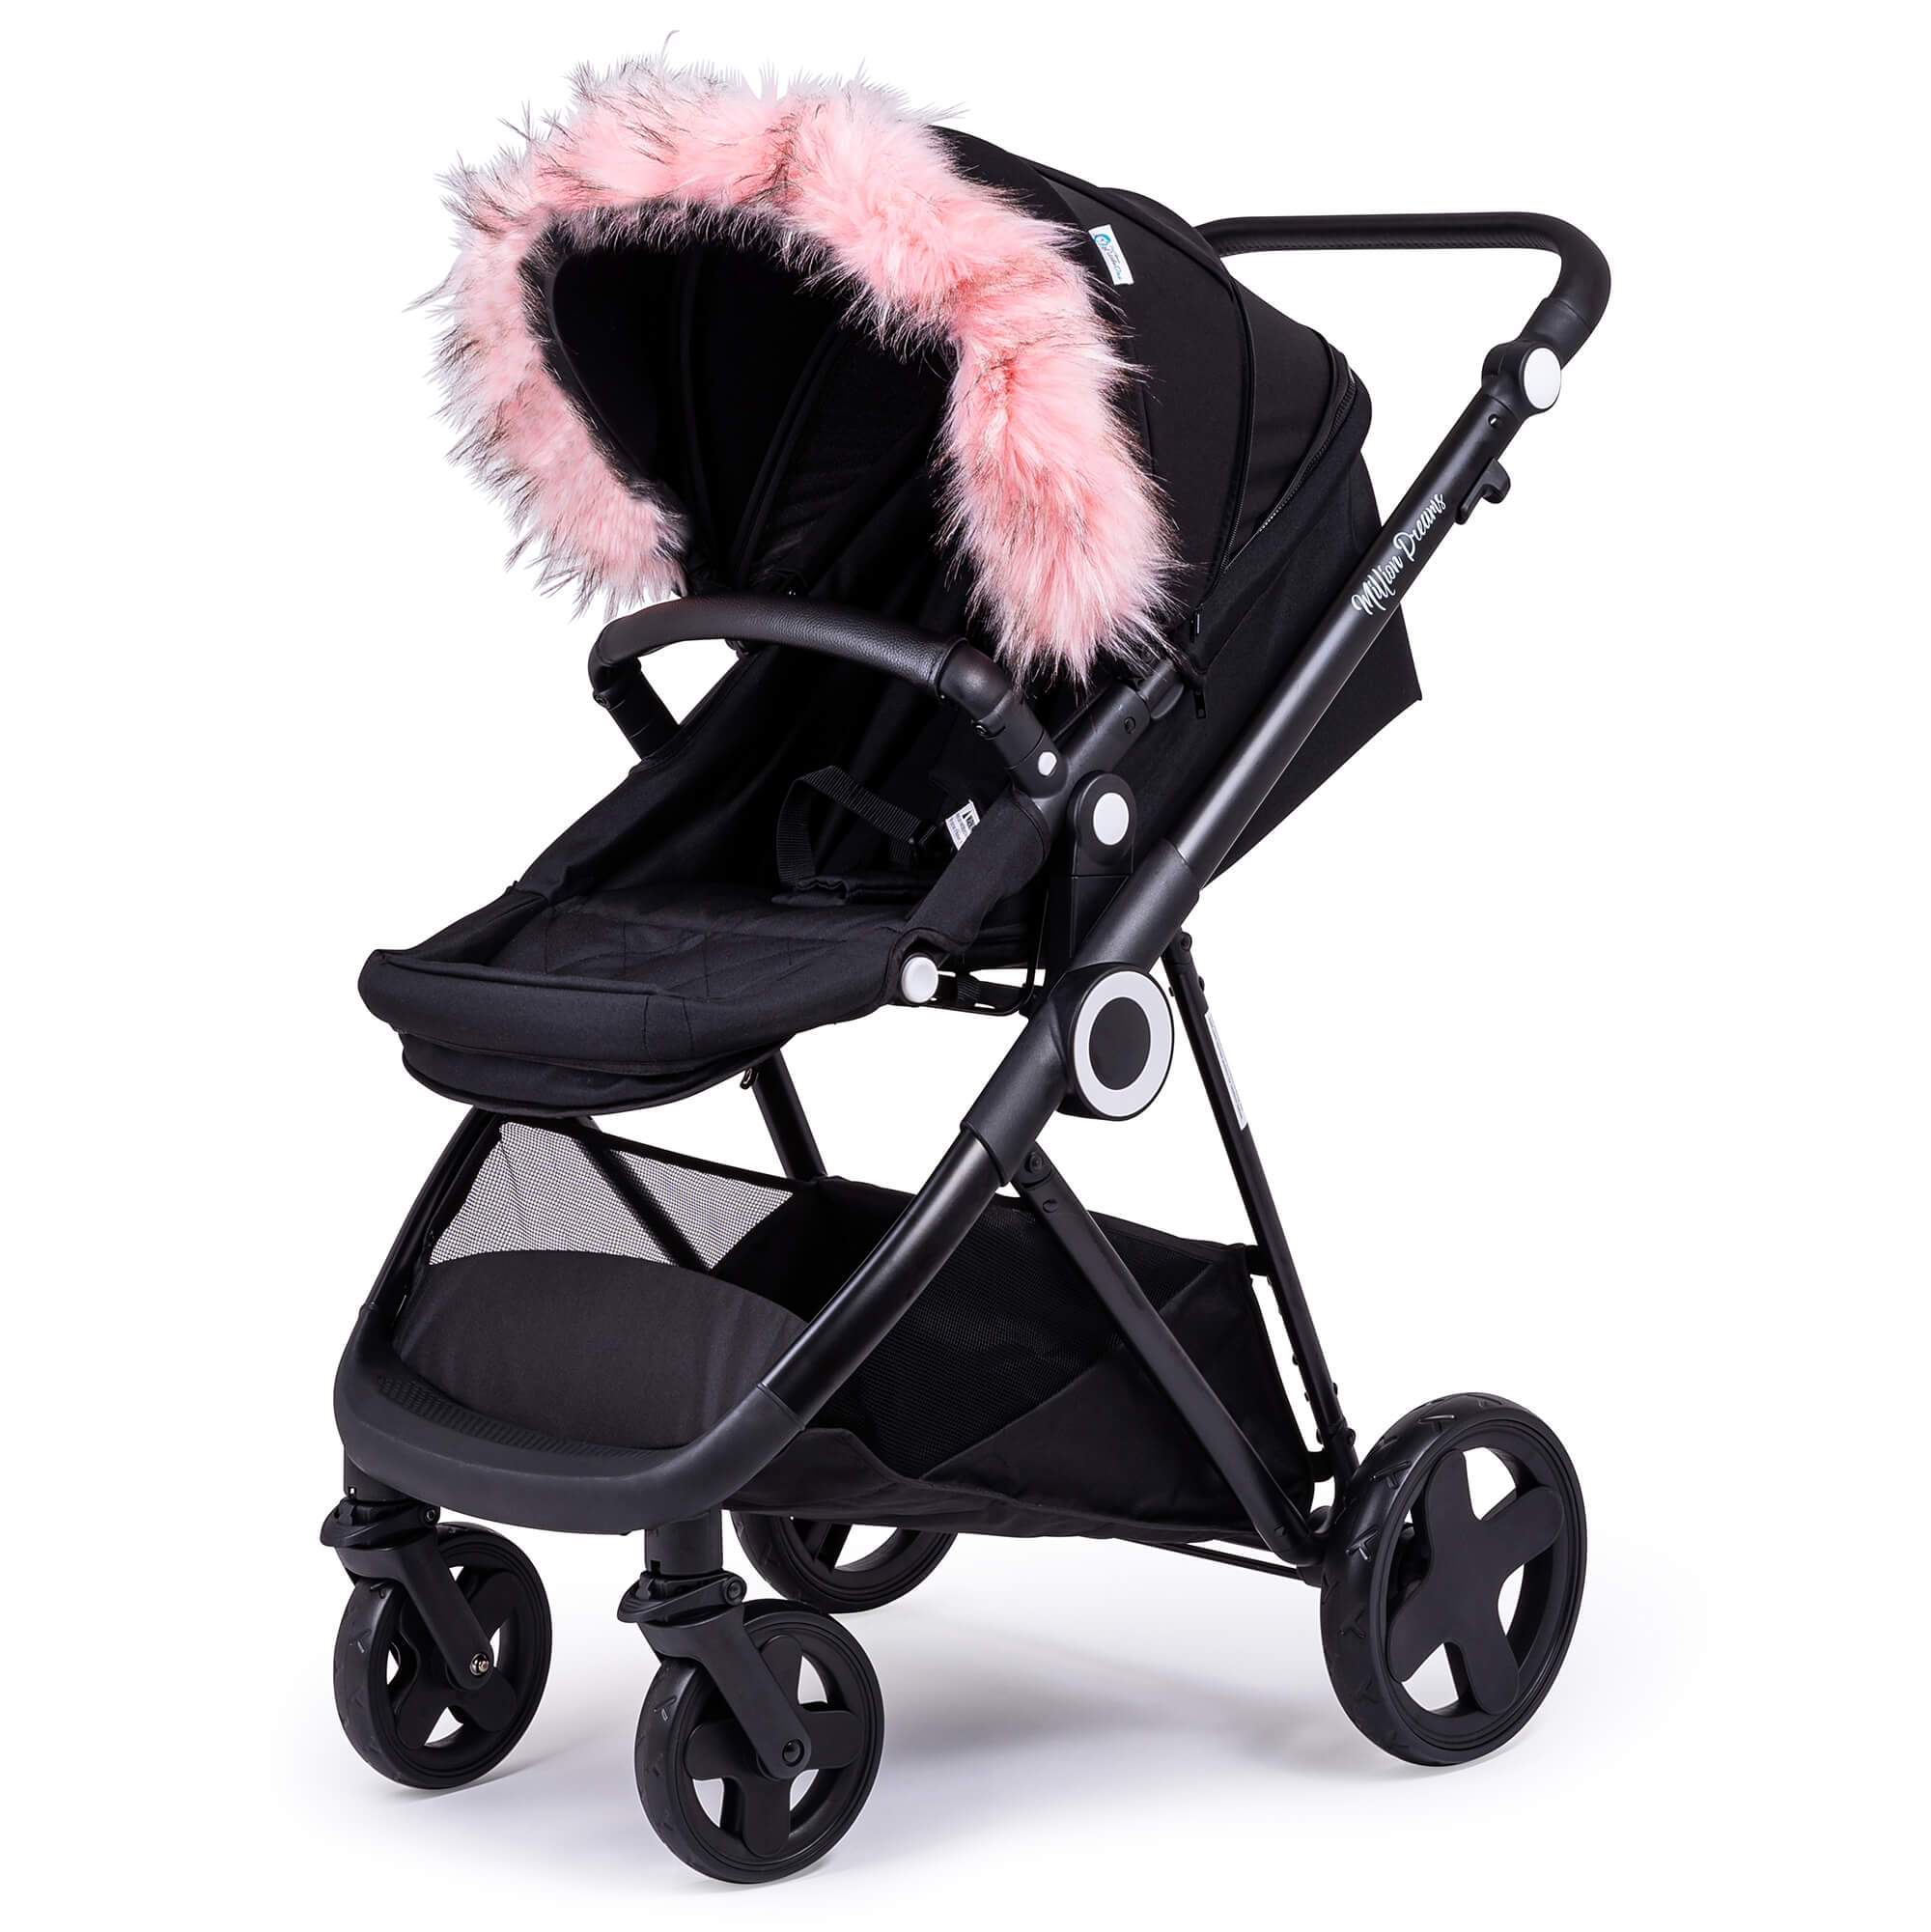 Pram Fur Hood Trim Attachment for Pushchair Compatible with Britax - Light Pink / Fits All Models | For Your Little One